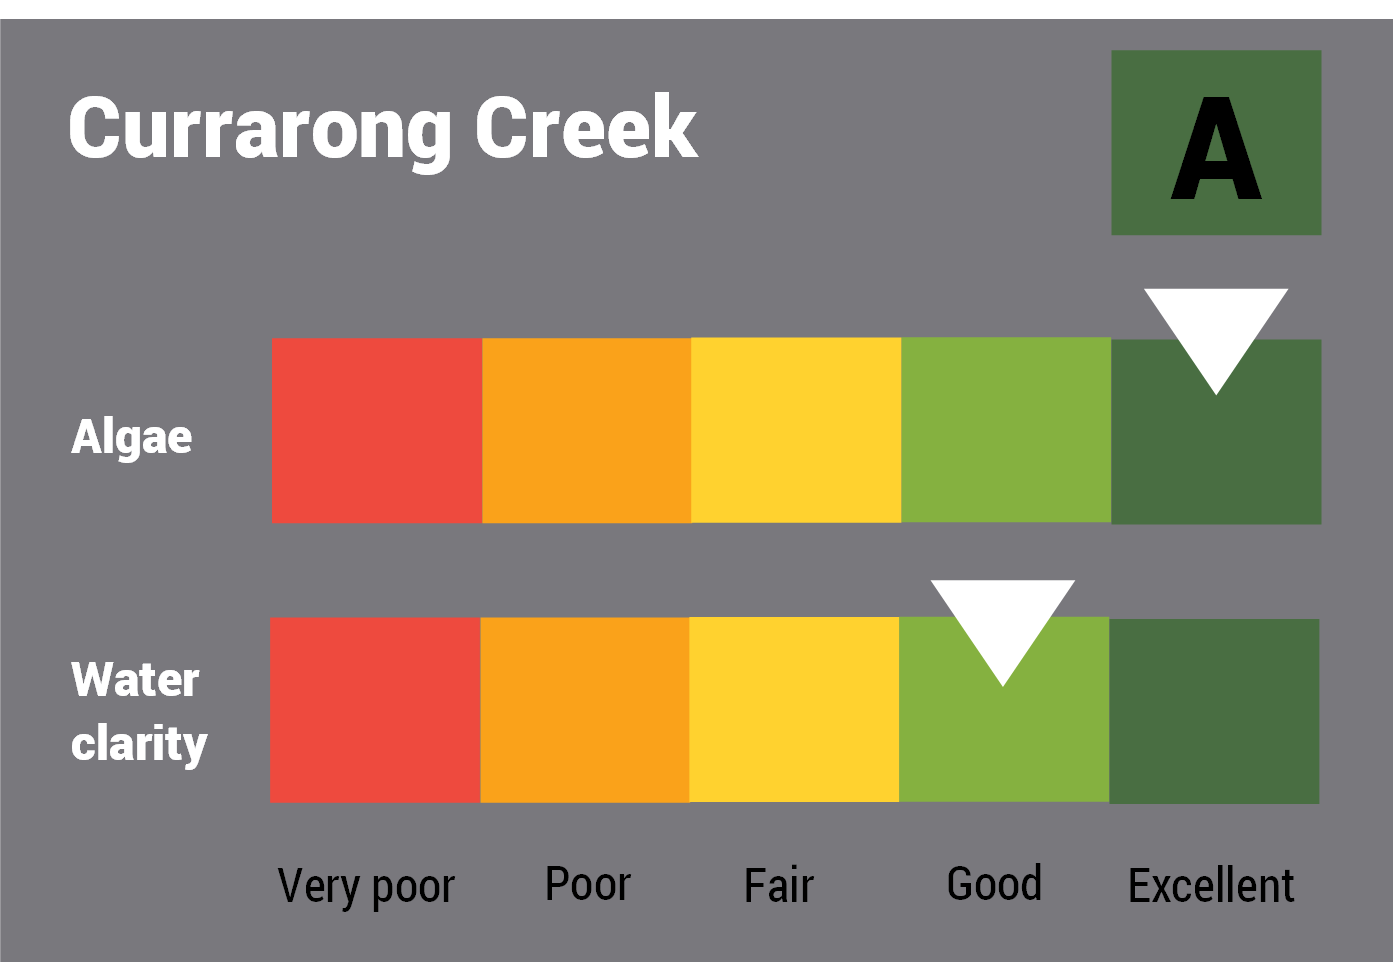 Currarong Creek water quality report card for algae and water clarity showing colour-coded ratings (red, orange, yellow, light green and dark green, which represent very poor, poor, fair, good and excellent, respectively). Algae is rated 'excellent' and water clarity is rated 'excellent' giving an overall rating of 'excellent' or 'A'.